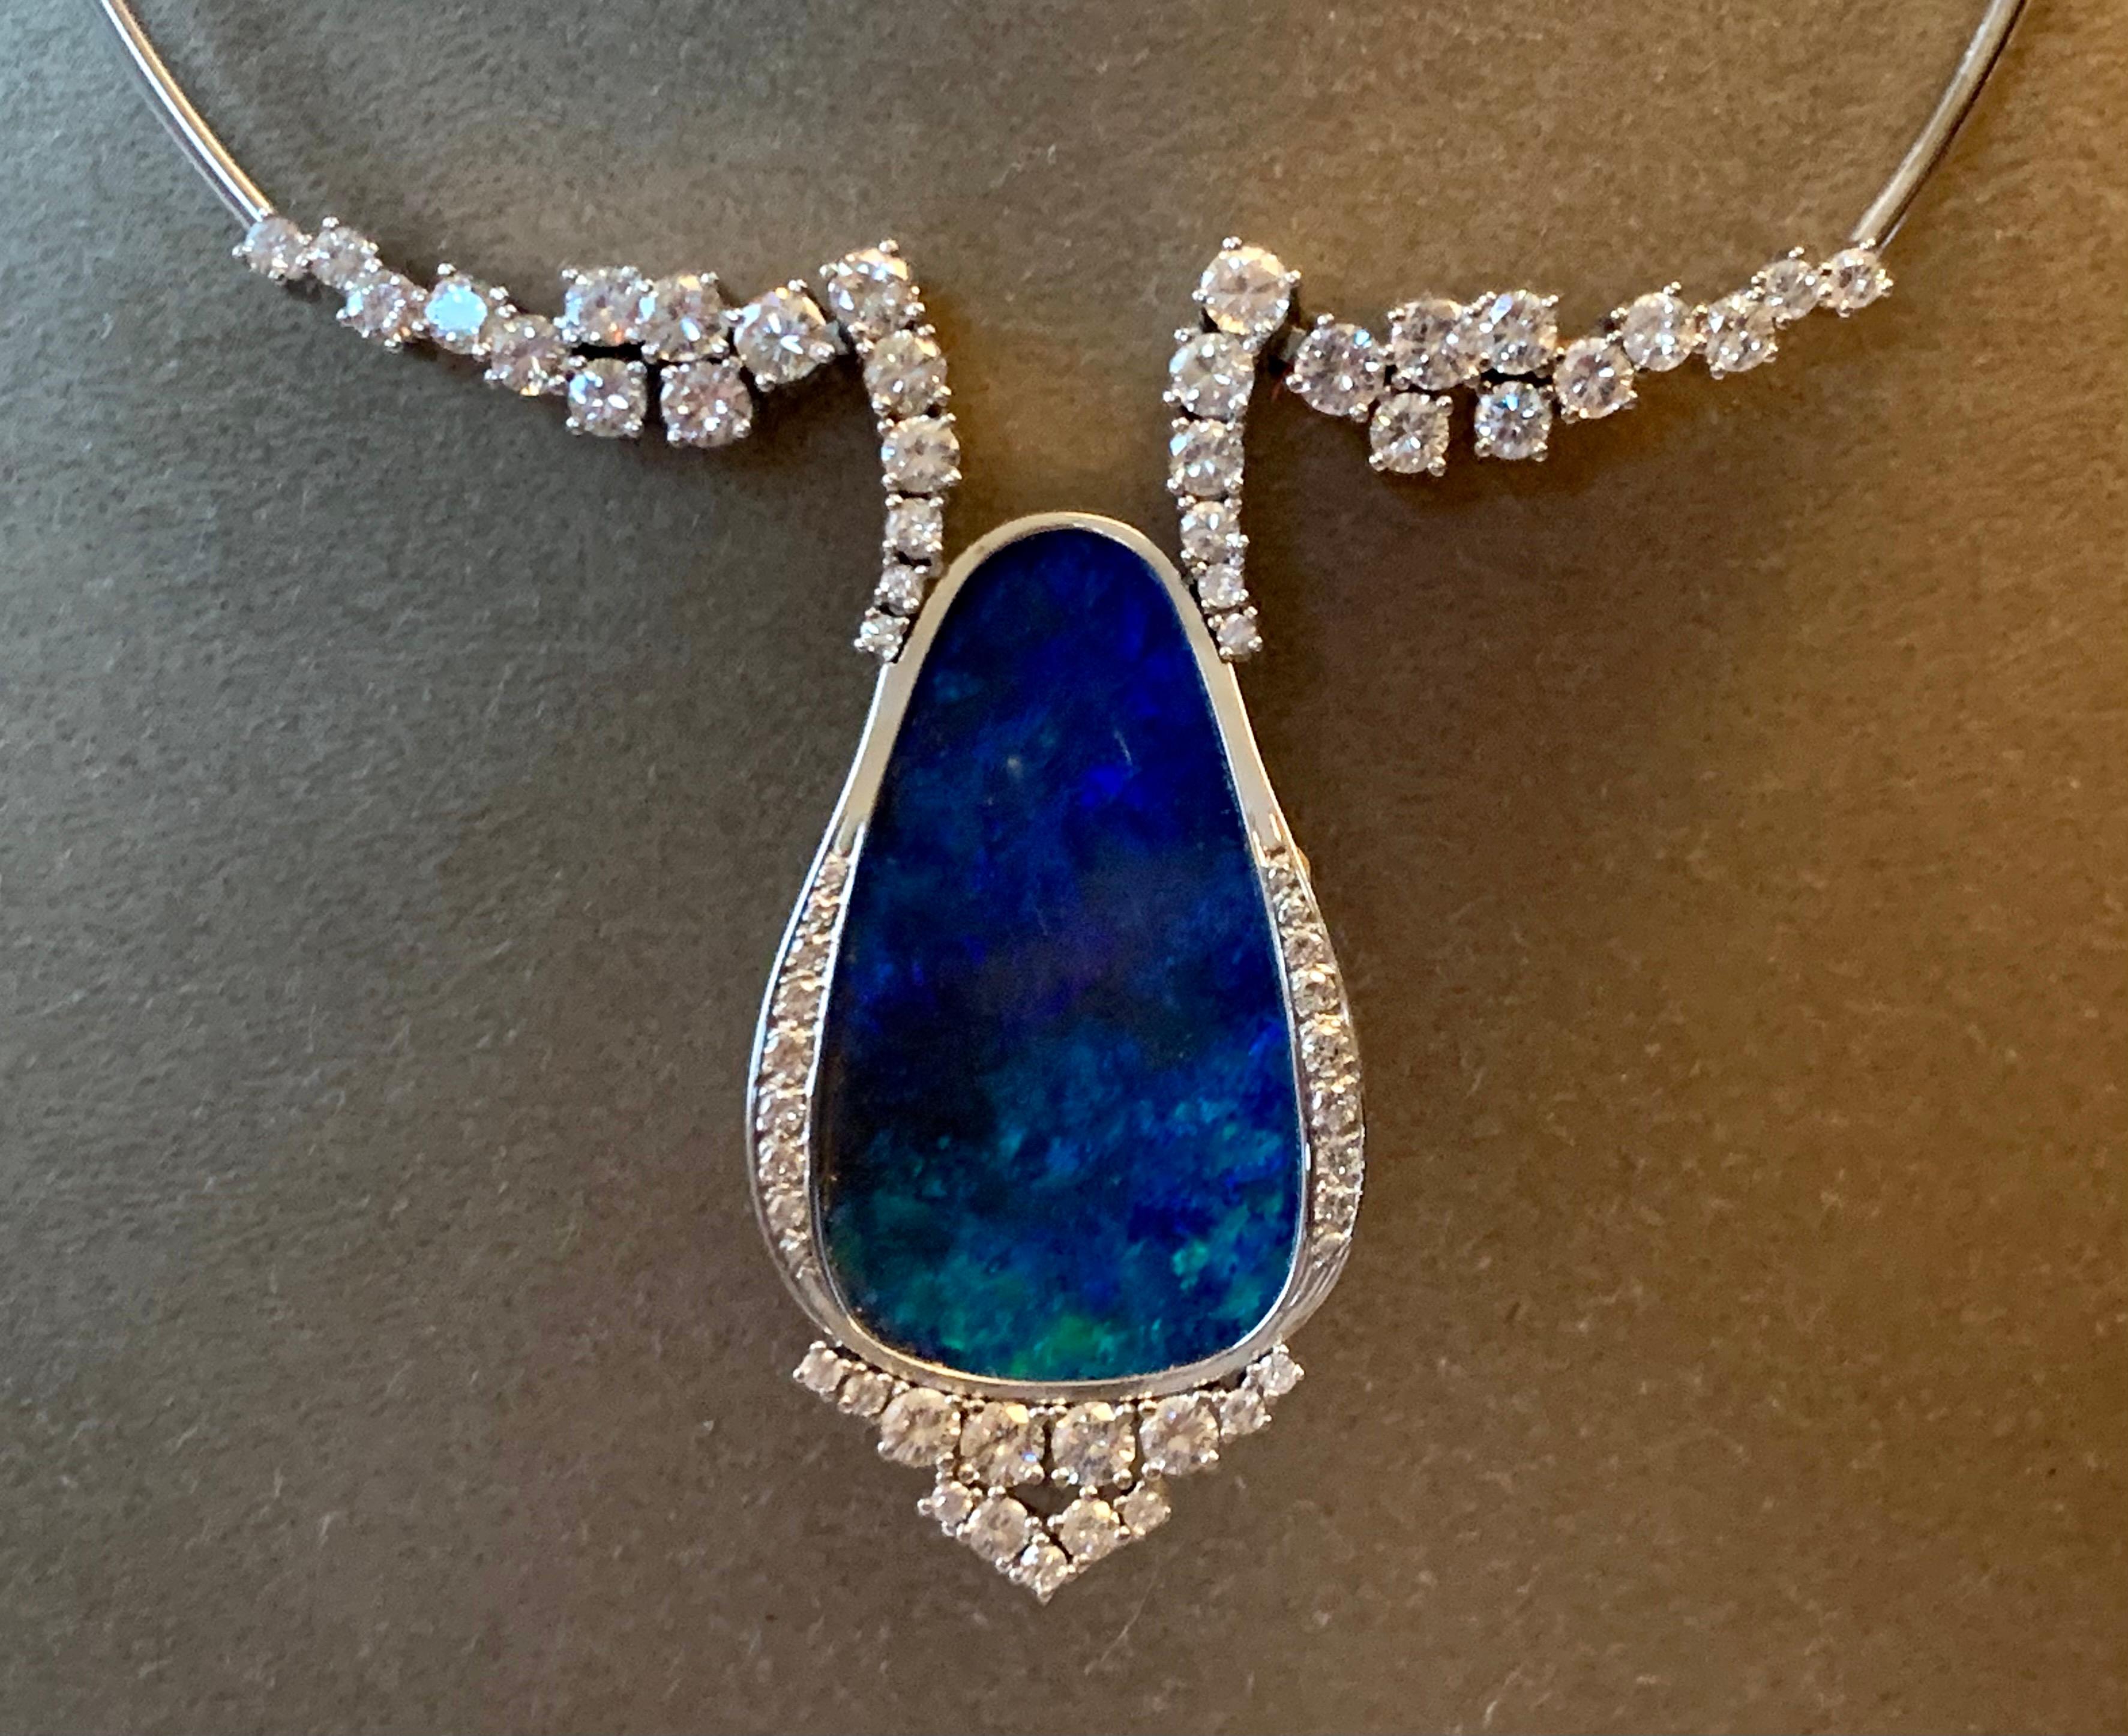 Very attractive and solid handmade 18 K white Gold necklace with Black Opal triplet and 63 brilliant cut Diamonds weighing approximately 6 ct, G color, vs clarity. 
Length: 40 cm
Dimension of the opal pendant: 4.9 cm and widest point: 2.80